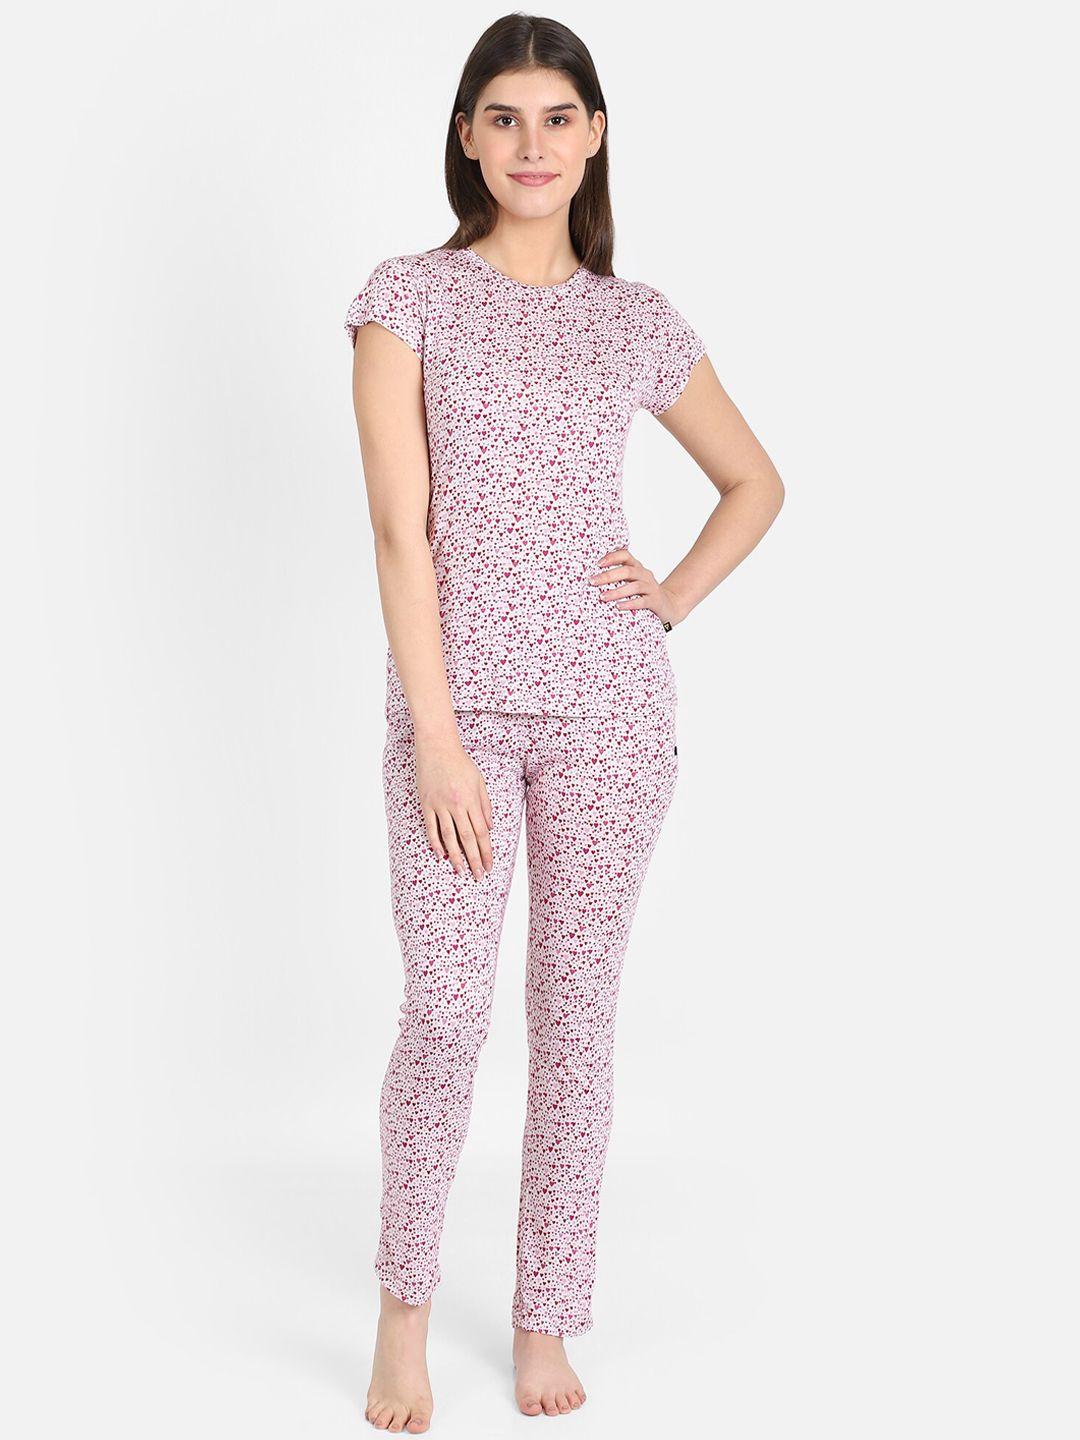 proteens-women-white-&-red-printed-night-suit